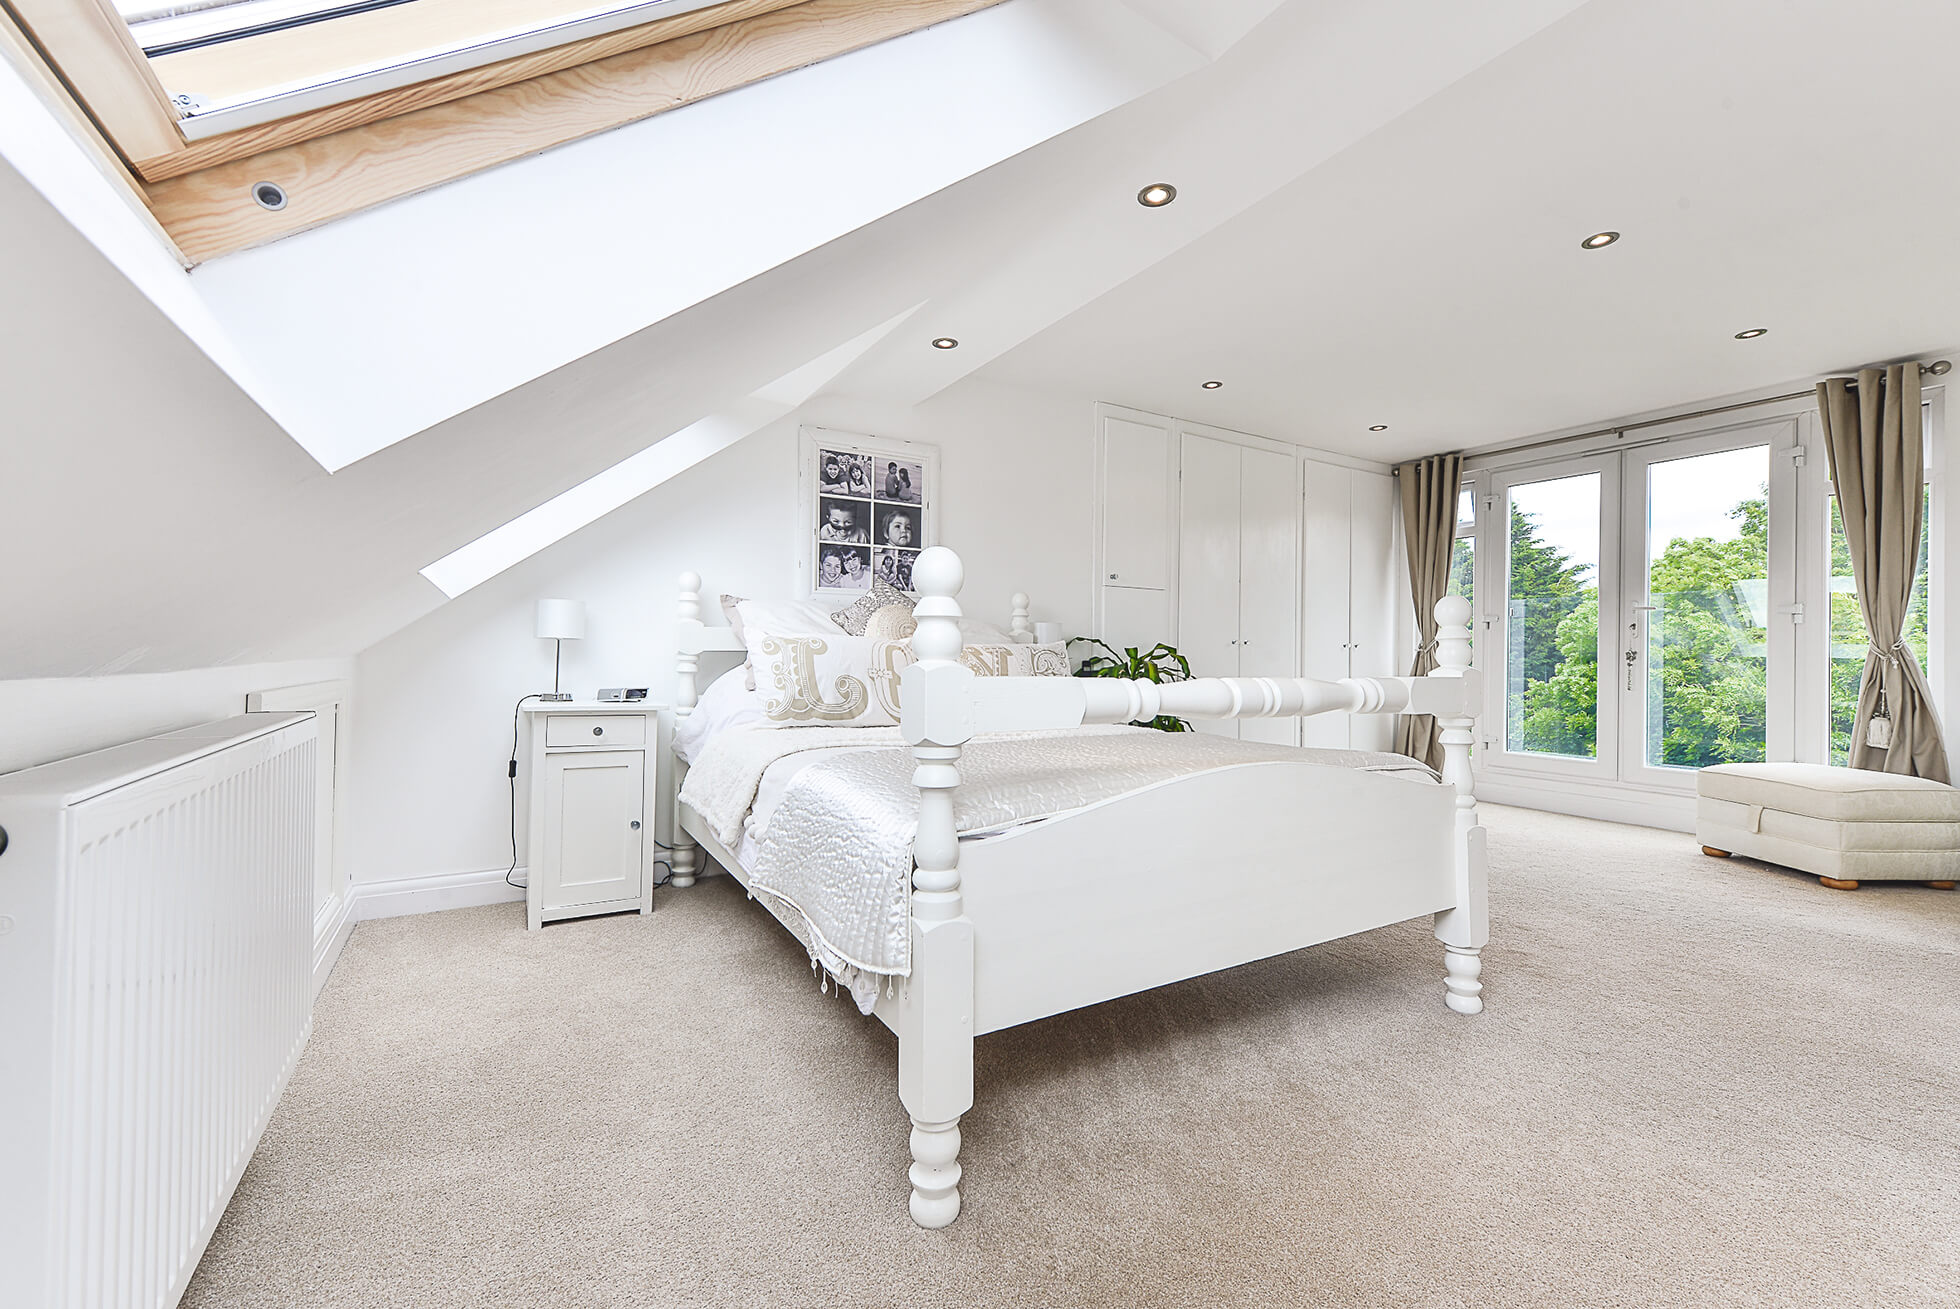 Do you have a question about converting your Loft in Wormley? Here are the most popular questions asked by our clients.